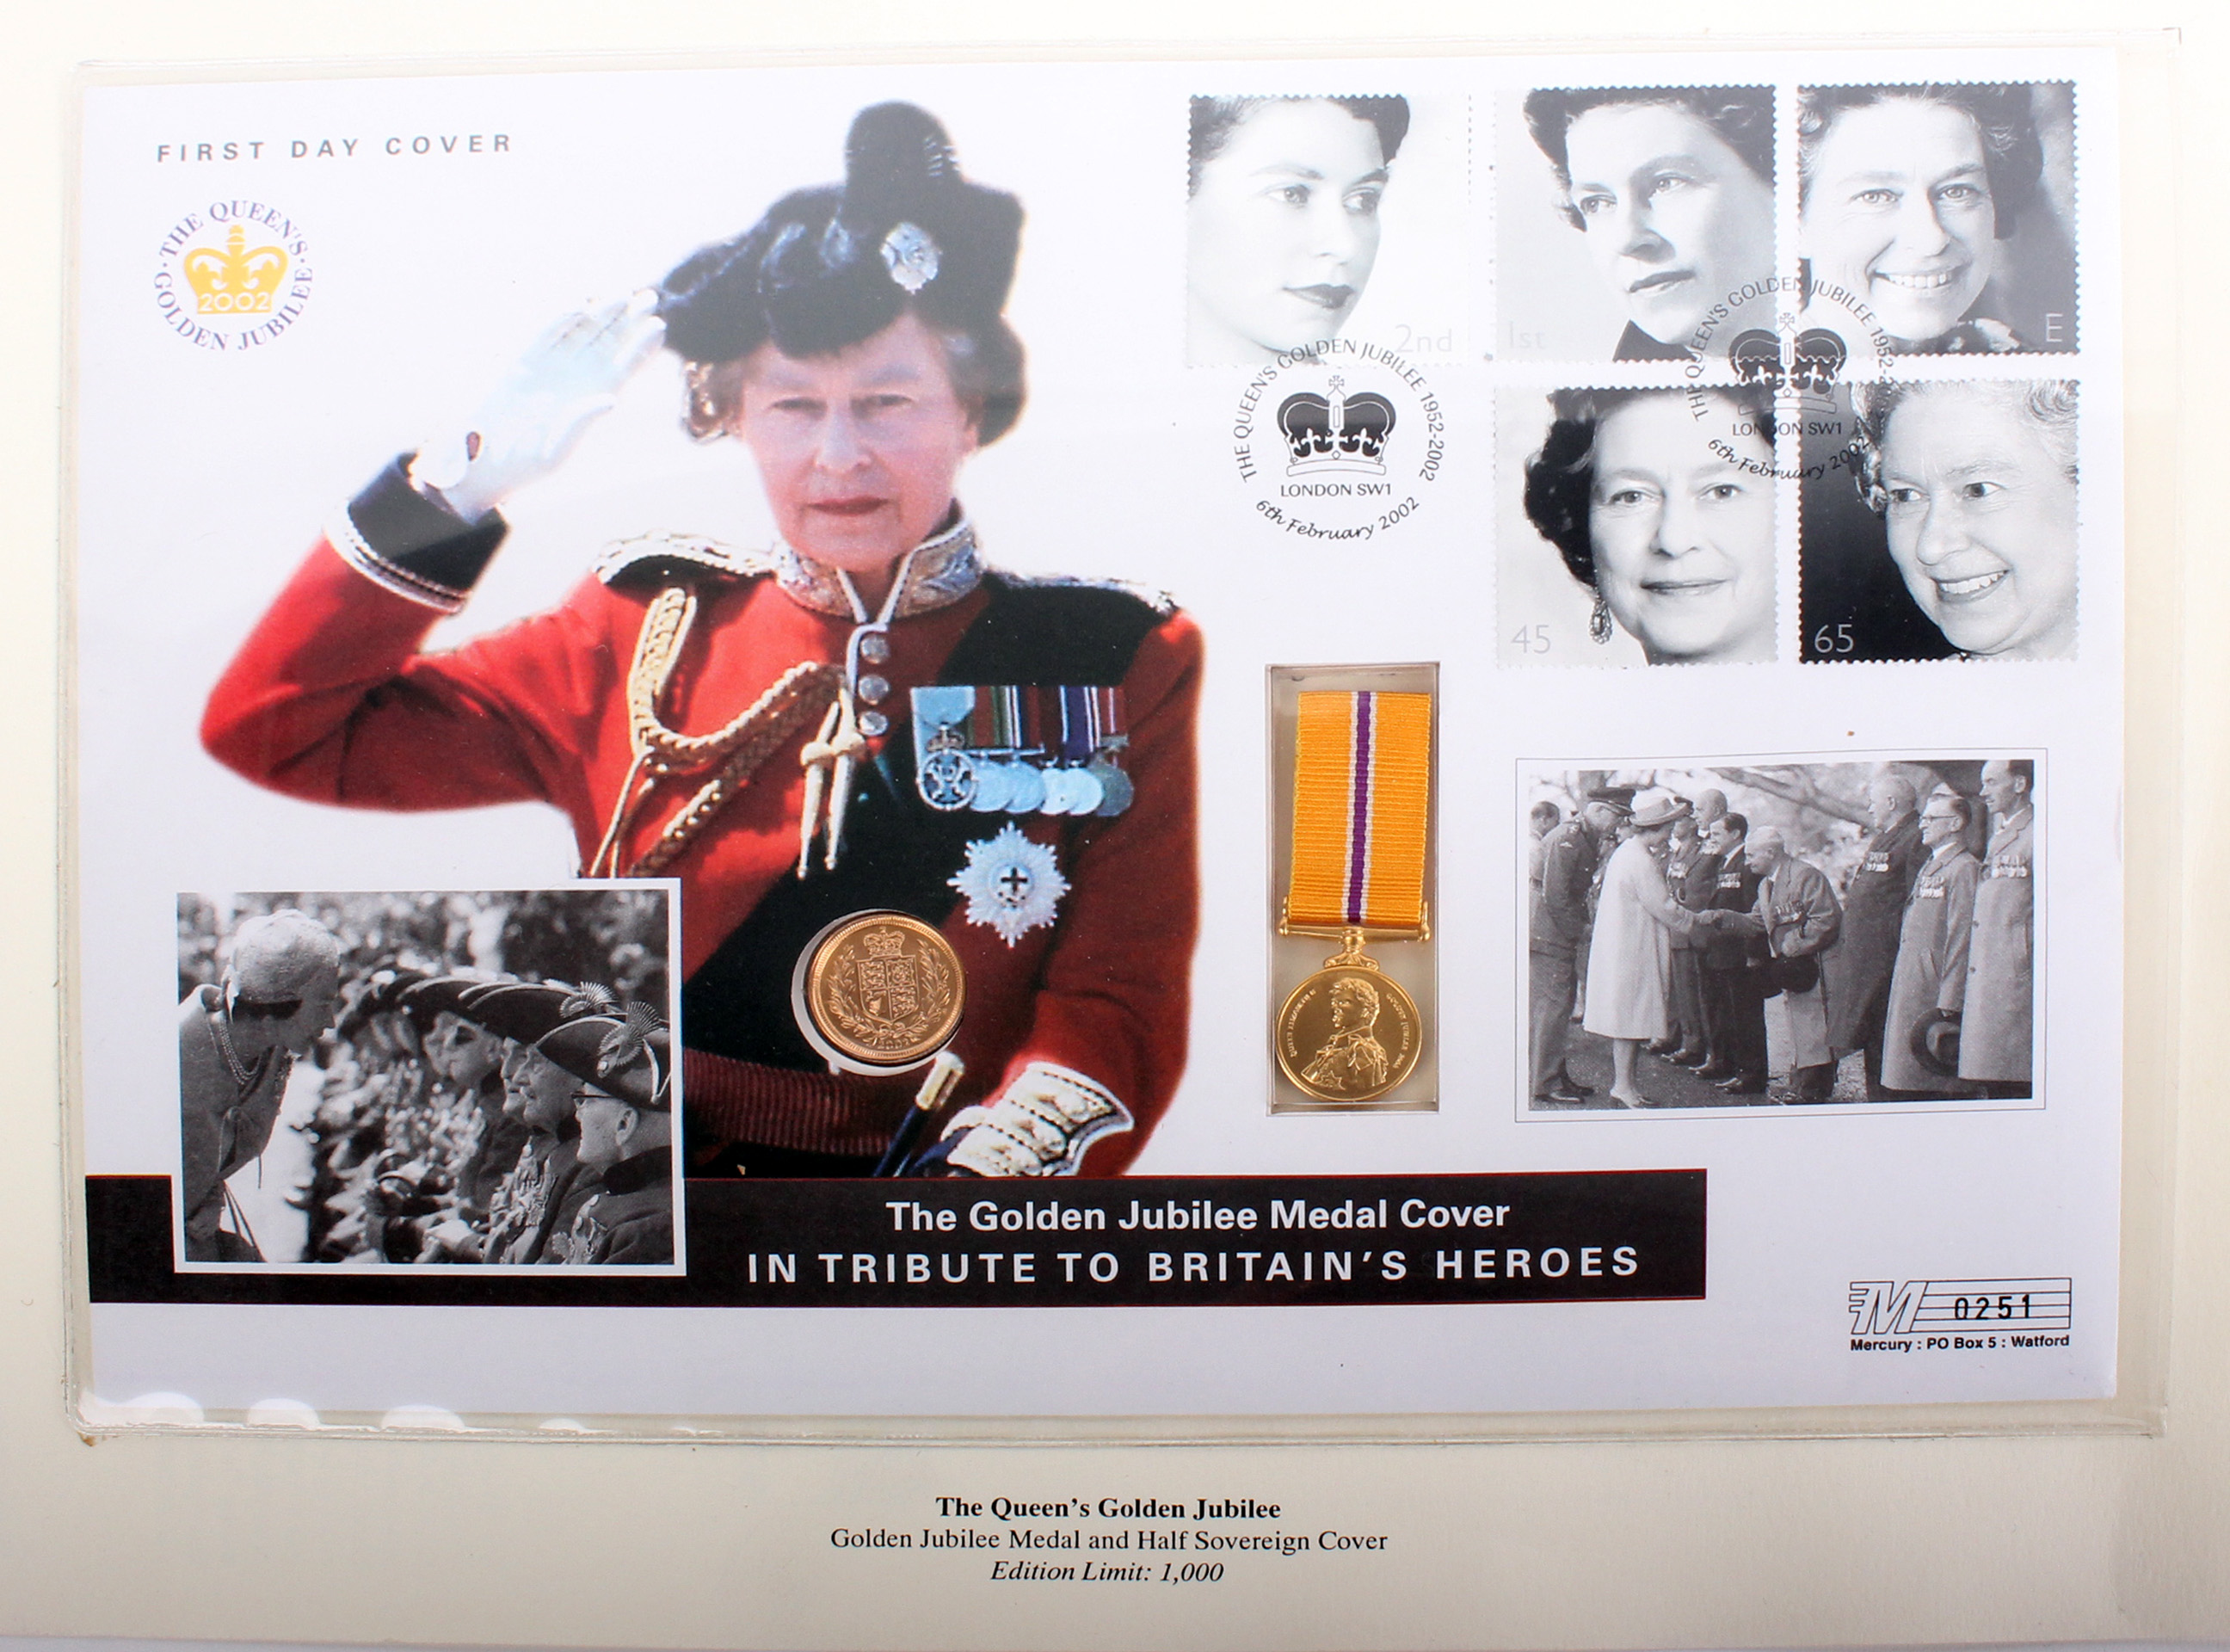 A Westminster Queens Golden Jubilee medal and half sovereign (2002) cover, carded, limited edition